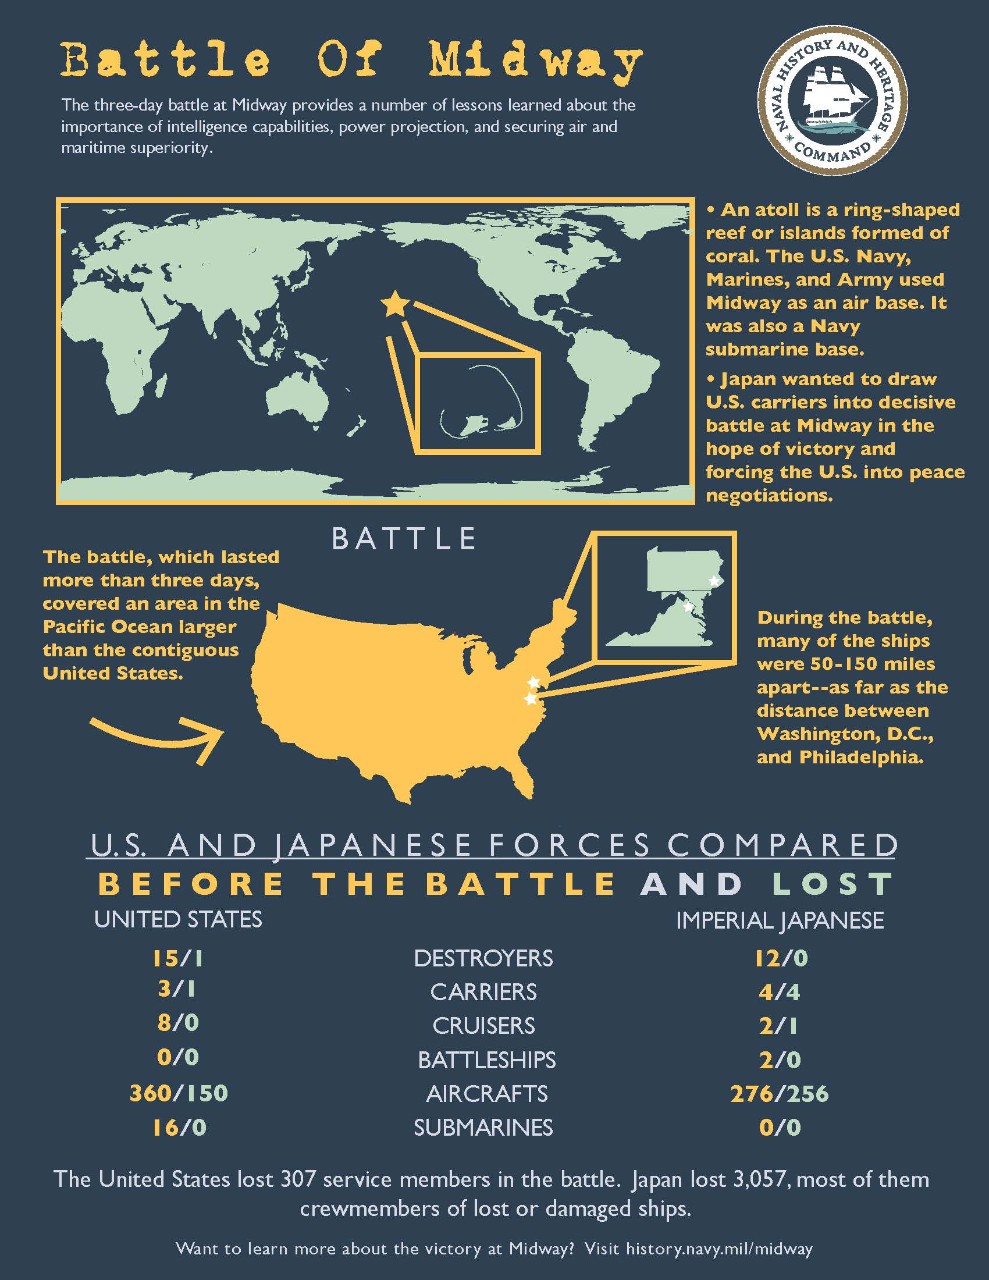 This infographic shares the scale of the Battle of Midway.